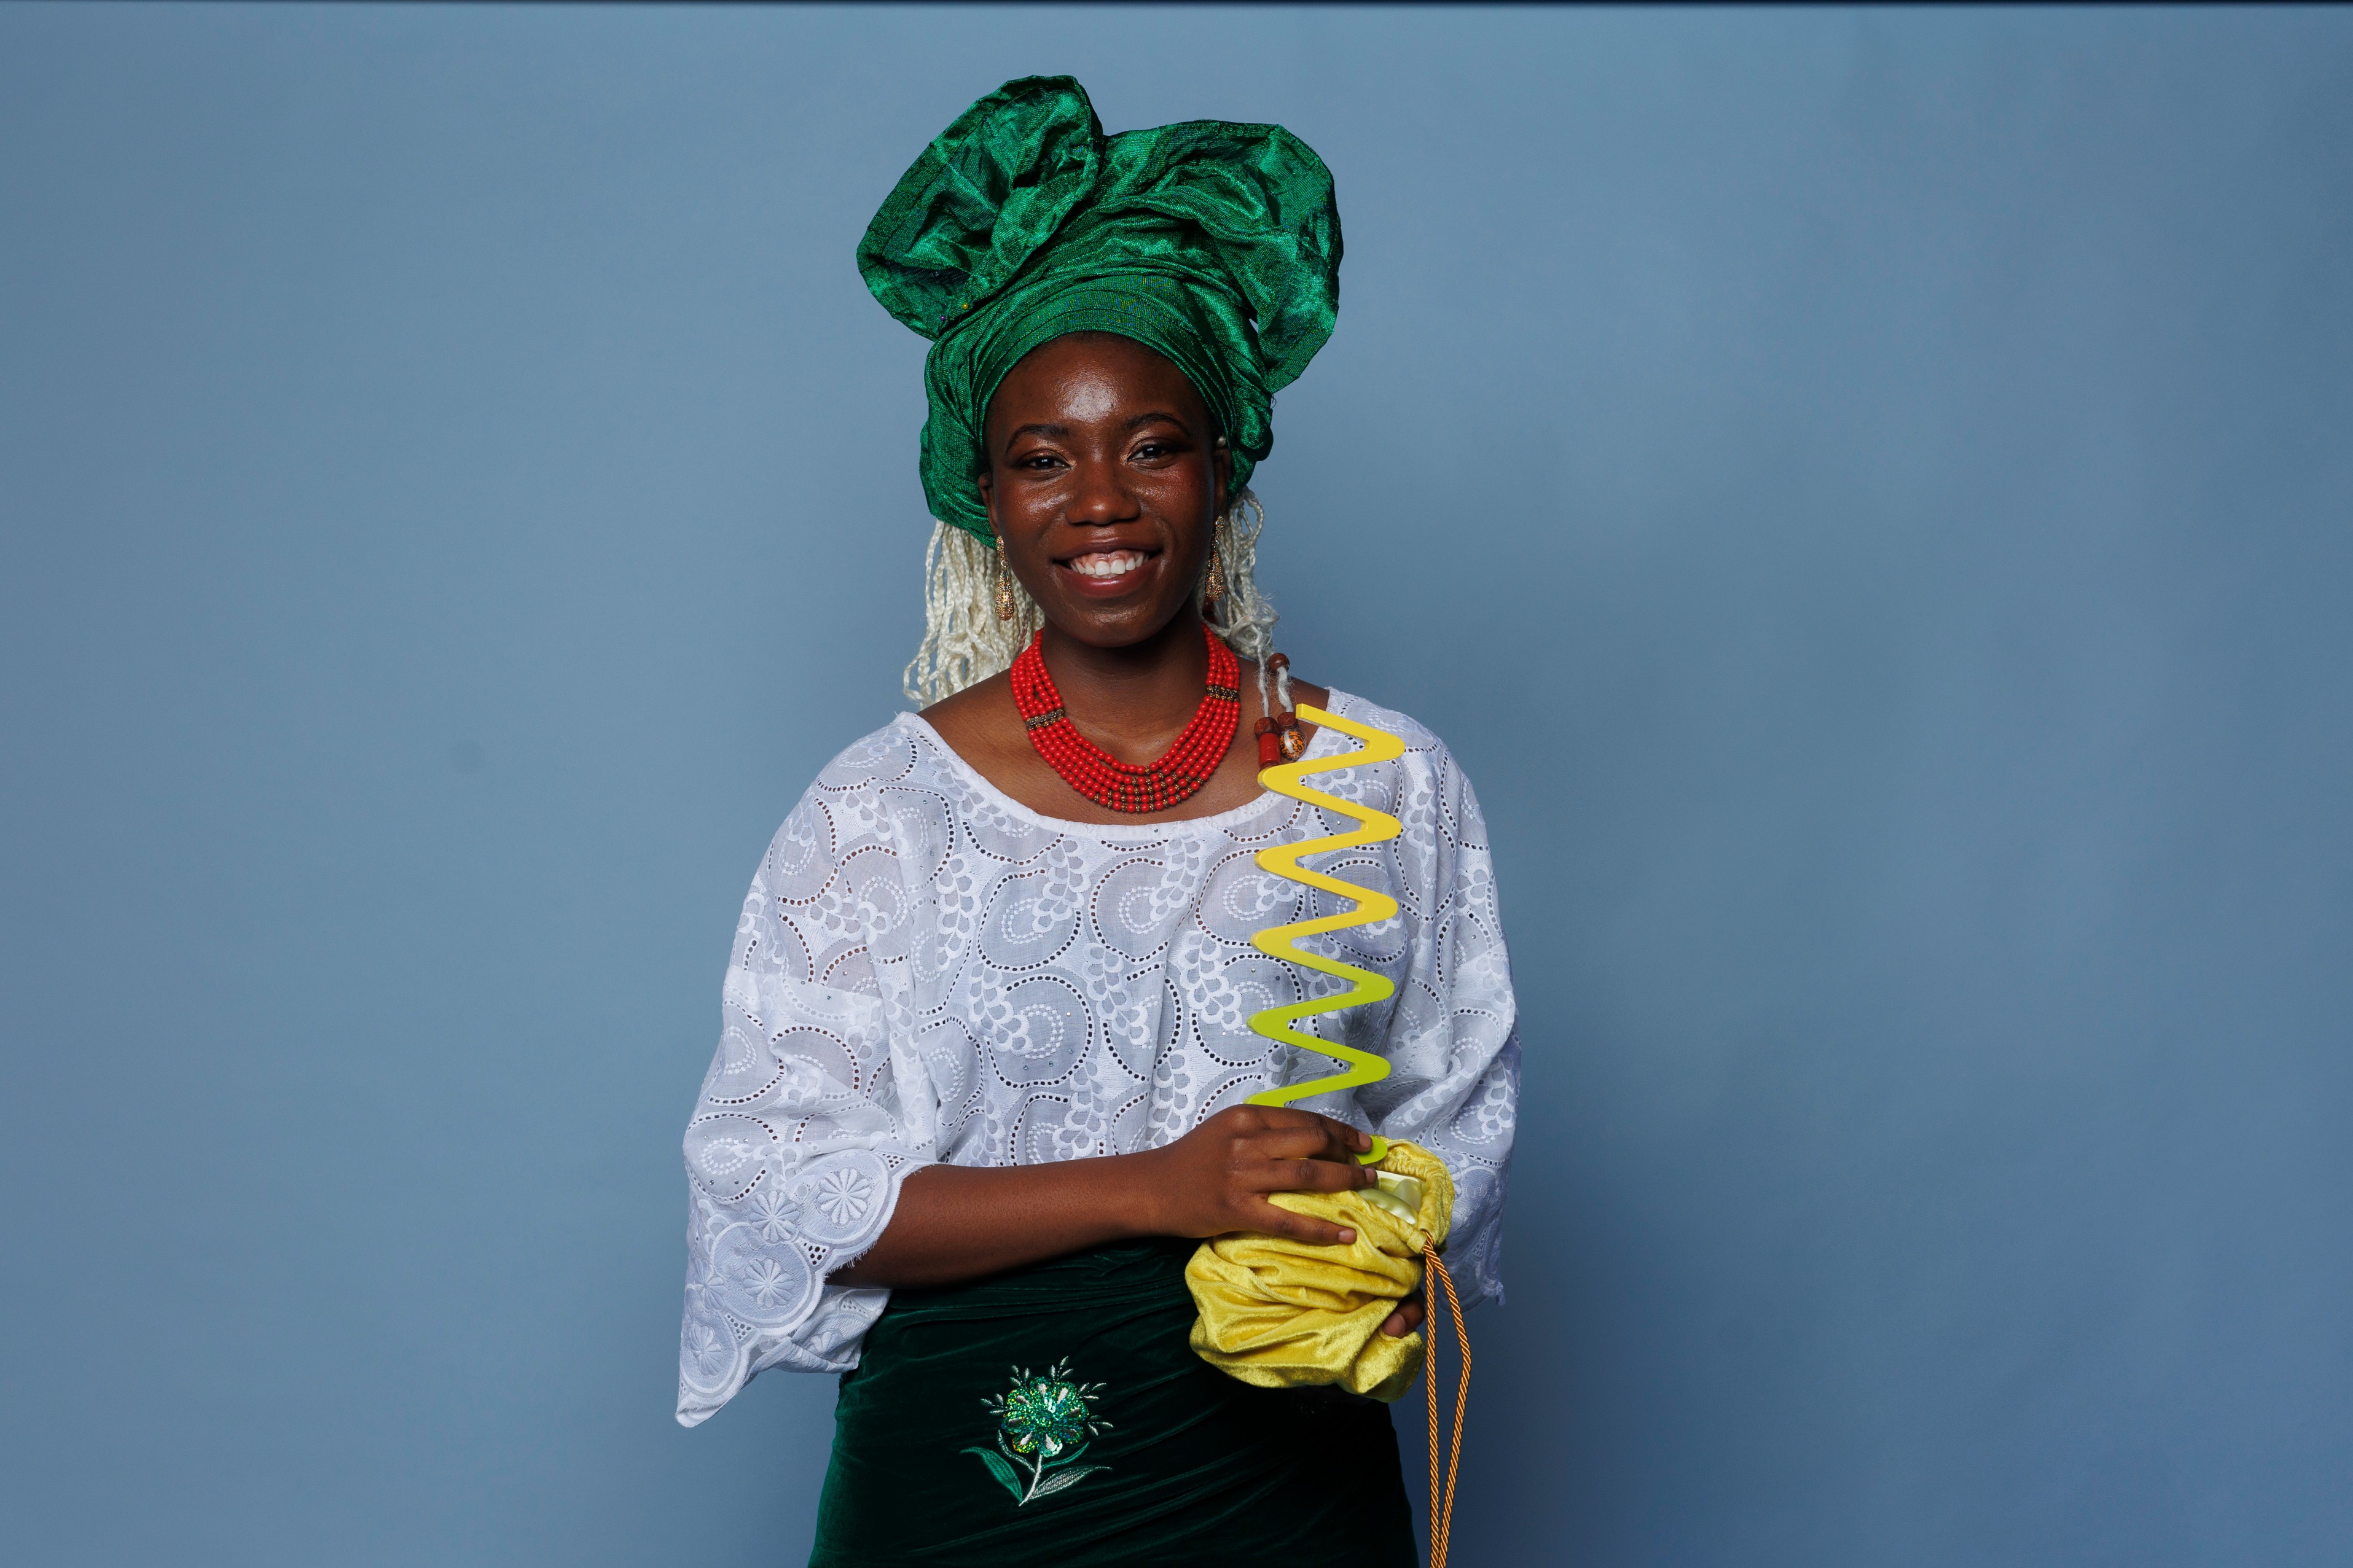 Peace Akintade, young black woman smiling in traditional Nigerian wear - bright green headwrap, large red necklace, white blouse and green skirt. She is holding a yellow wavelength award in a velvet yellow pouch gathered at the base of the award.